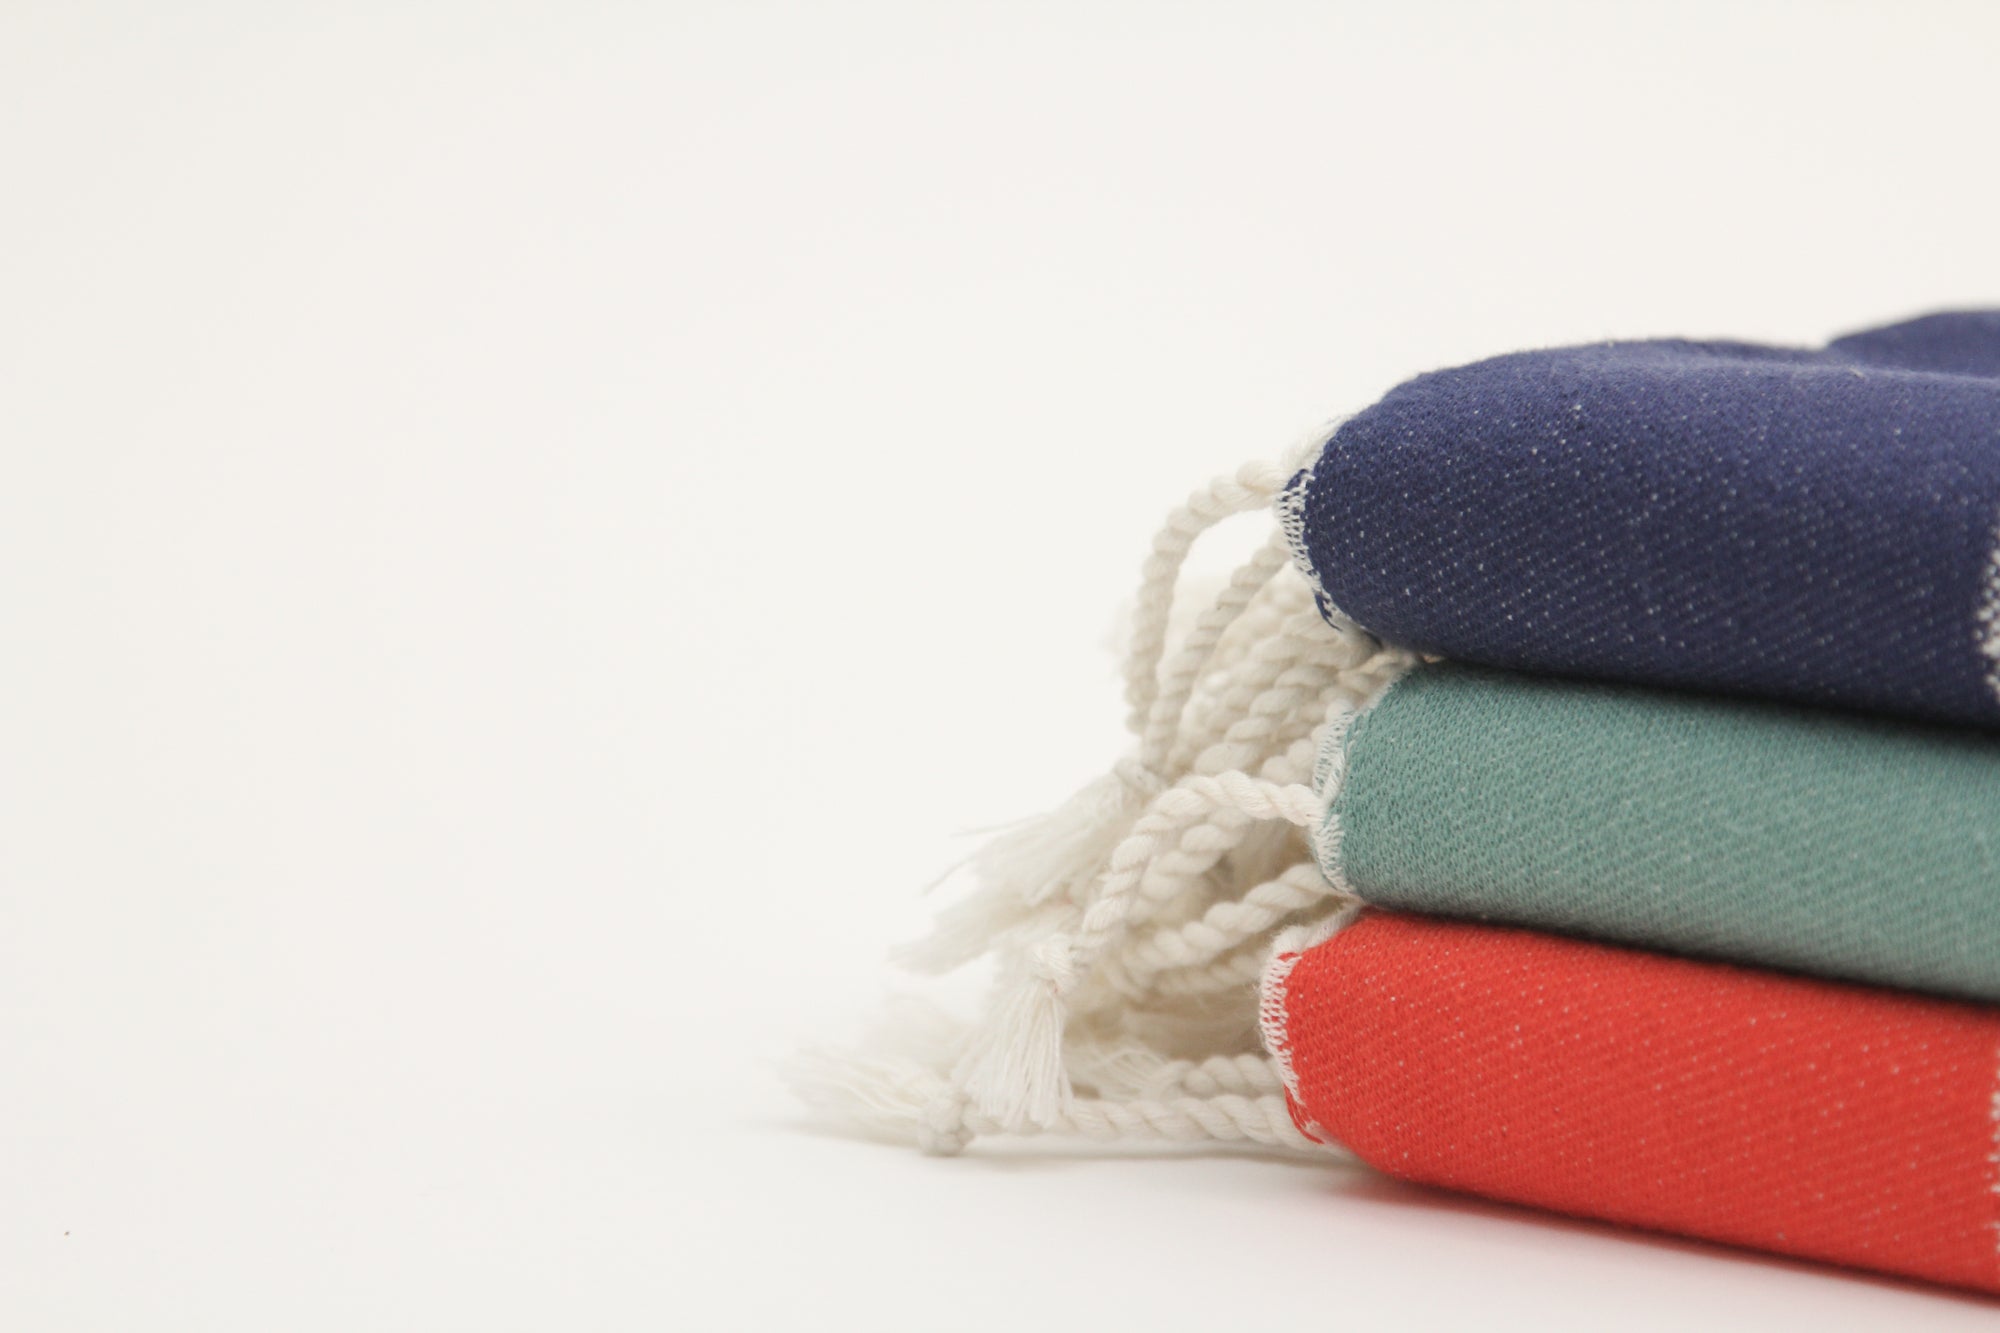 THE INDISPENSABLE TURKISH TOWEL: A MUST-HAVE FOR KIDS GOING BACK TO SCHOOL